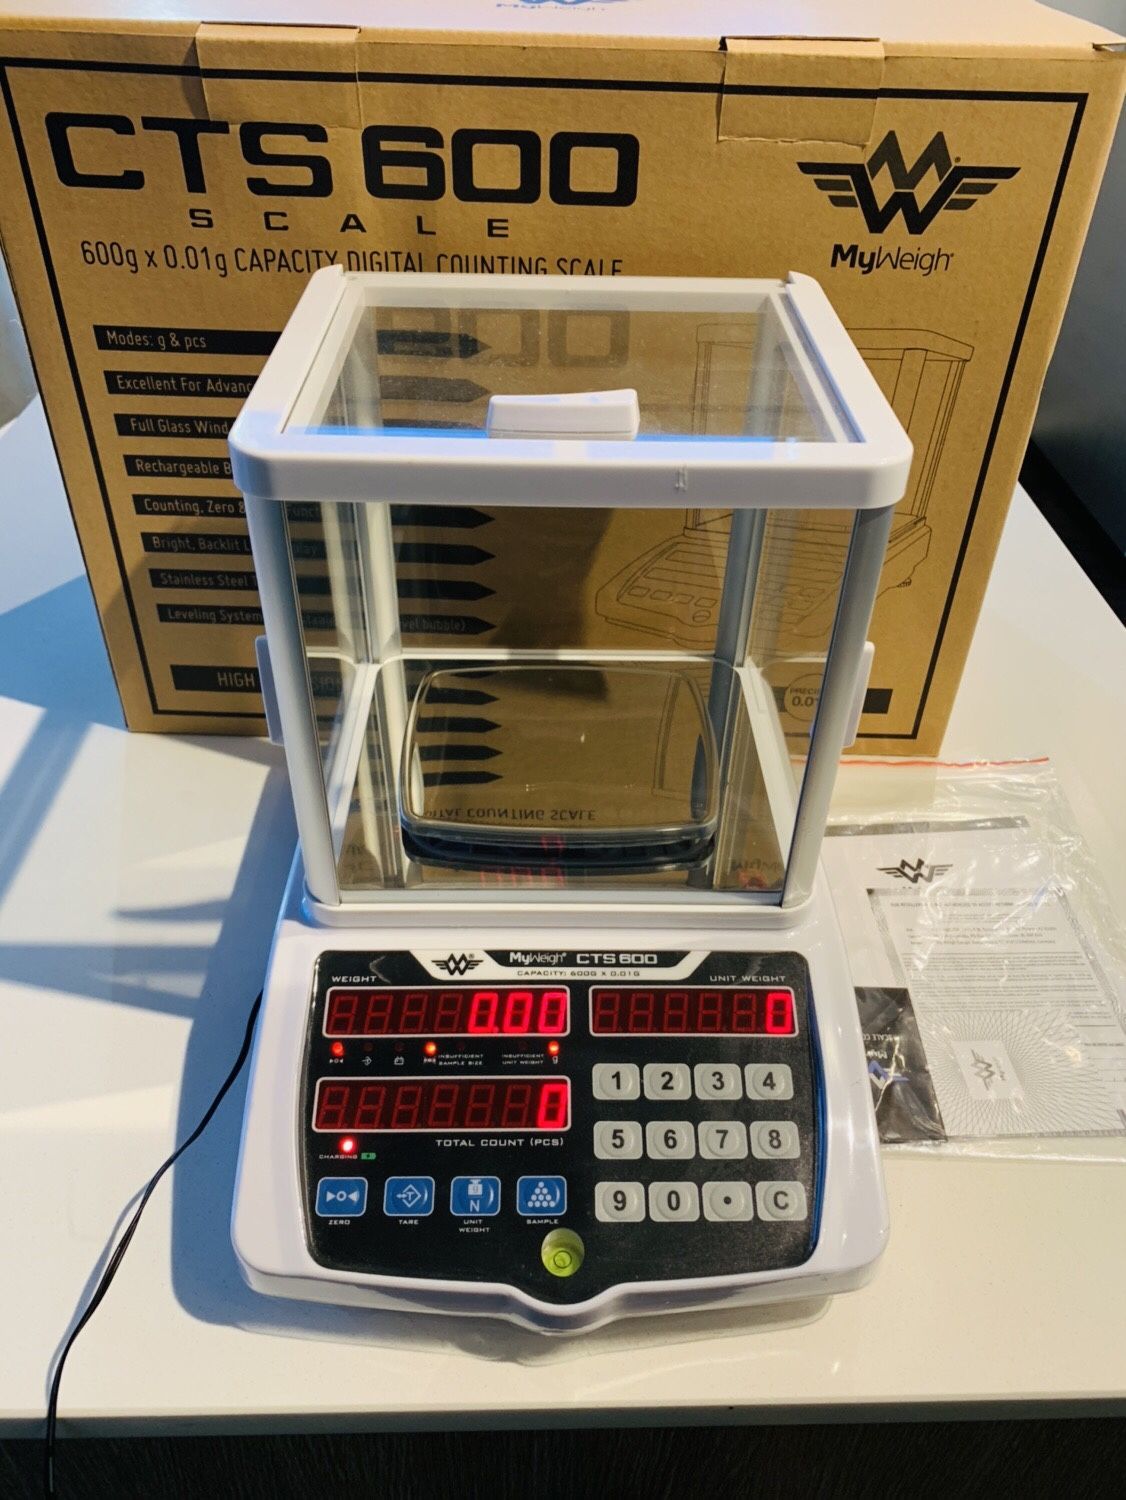 My Weigh CTS600 Precision Counting Scale